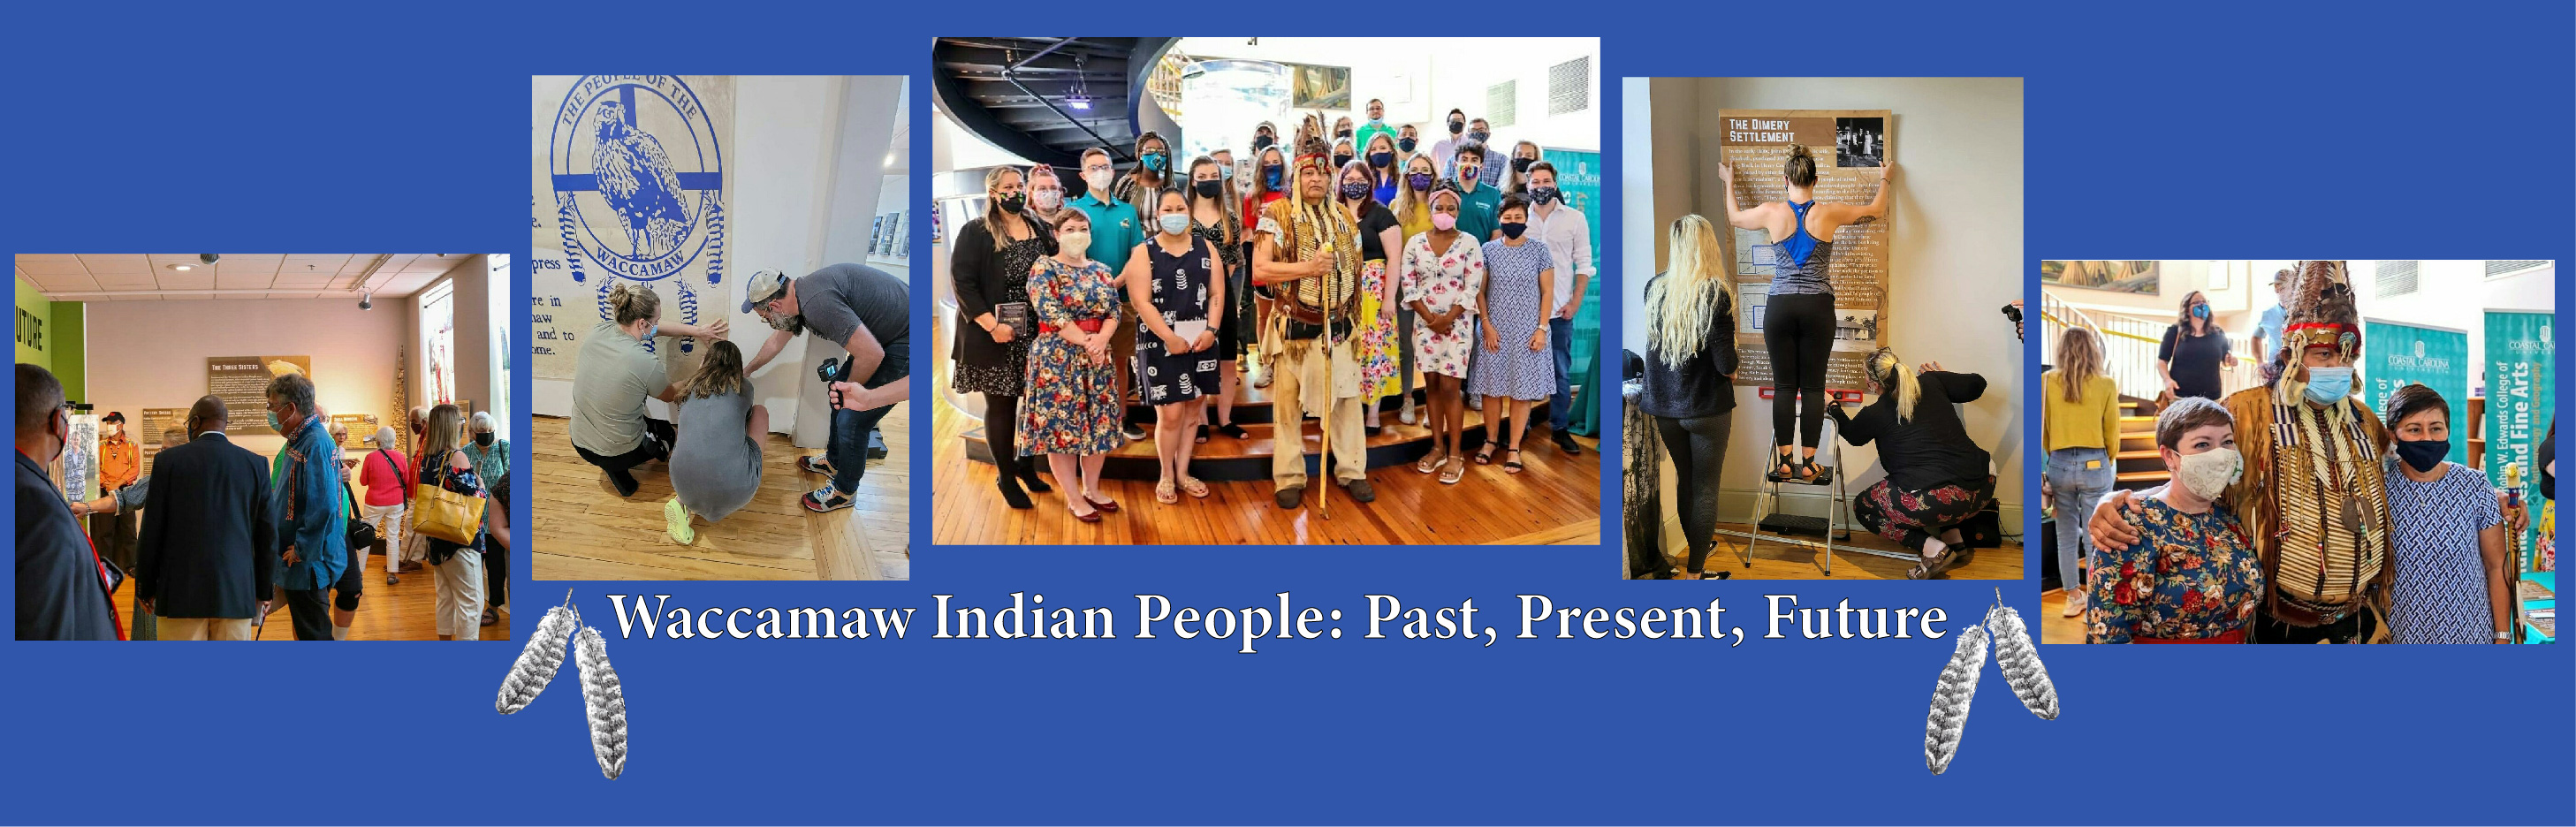 Waccamaw Indian People: Past, Present, and Future Exhibit (Added 5/5/2021) MCD 